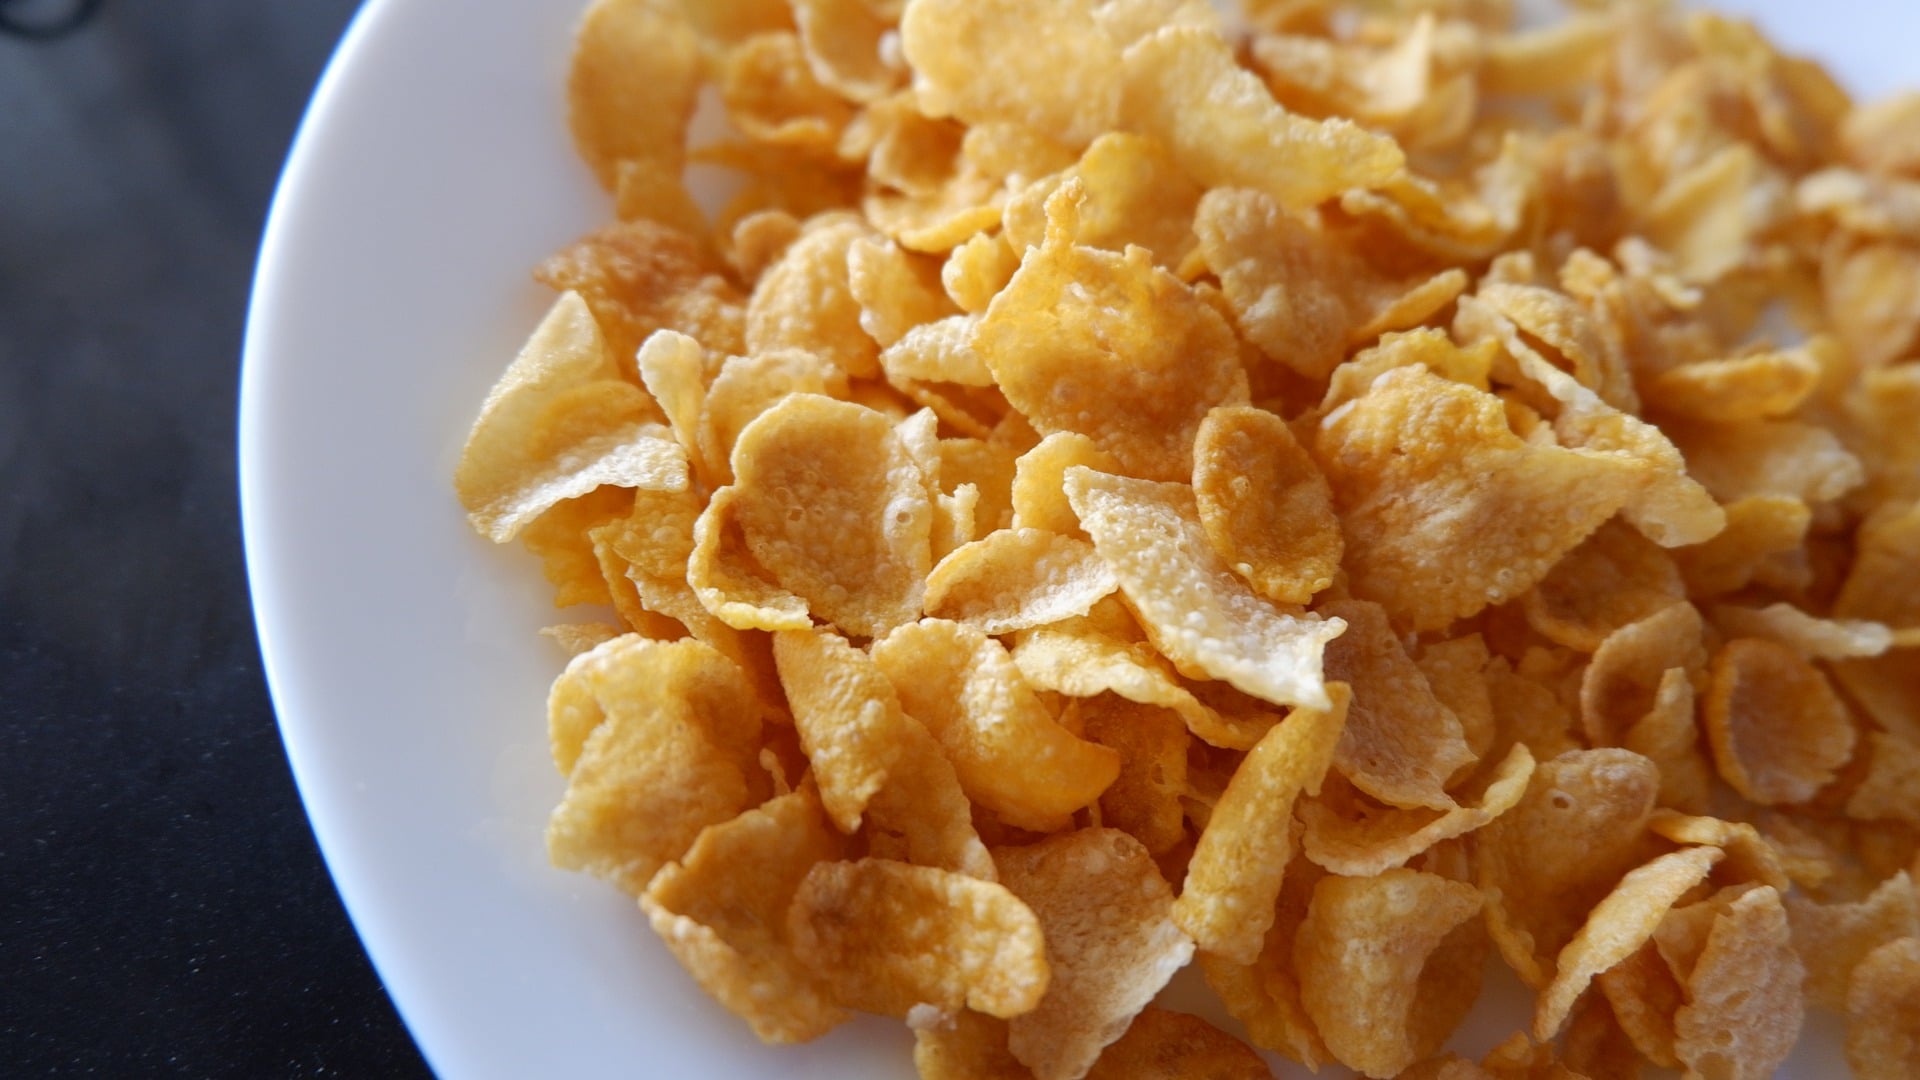 Interesting And Quick Snacks You Can Make With Cornflakes - Mishry.com